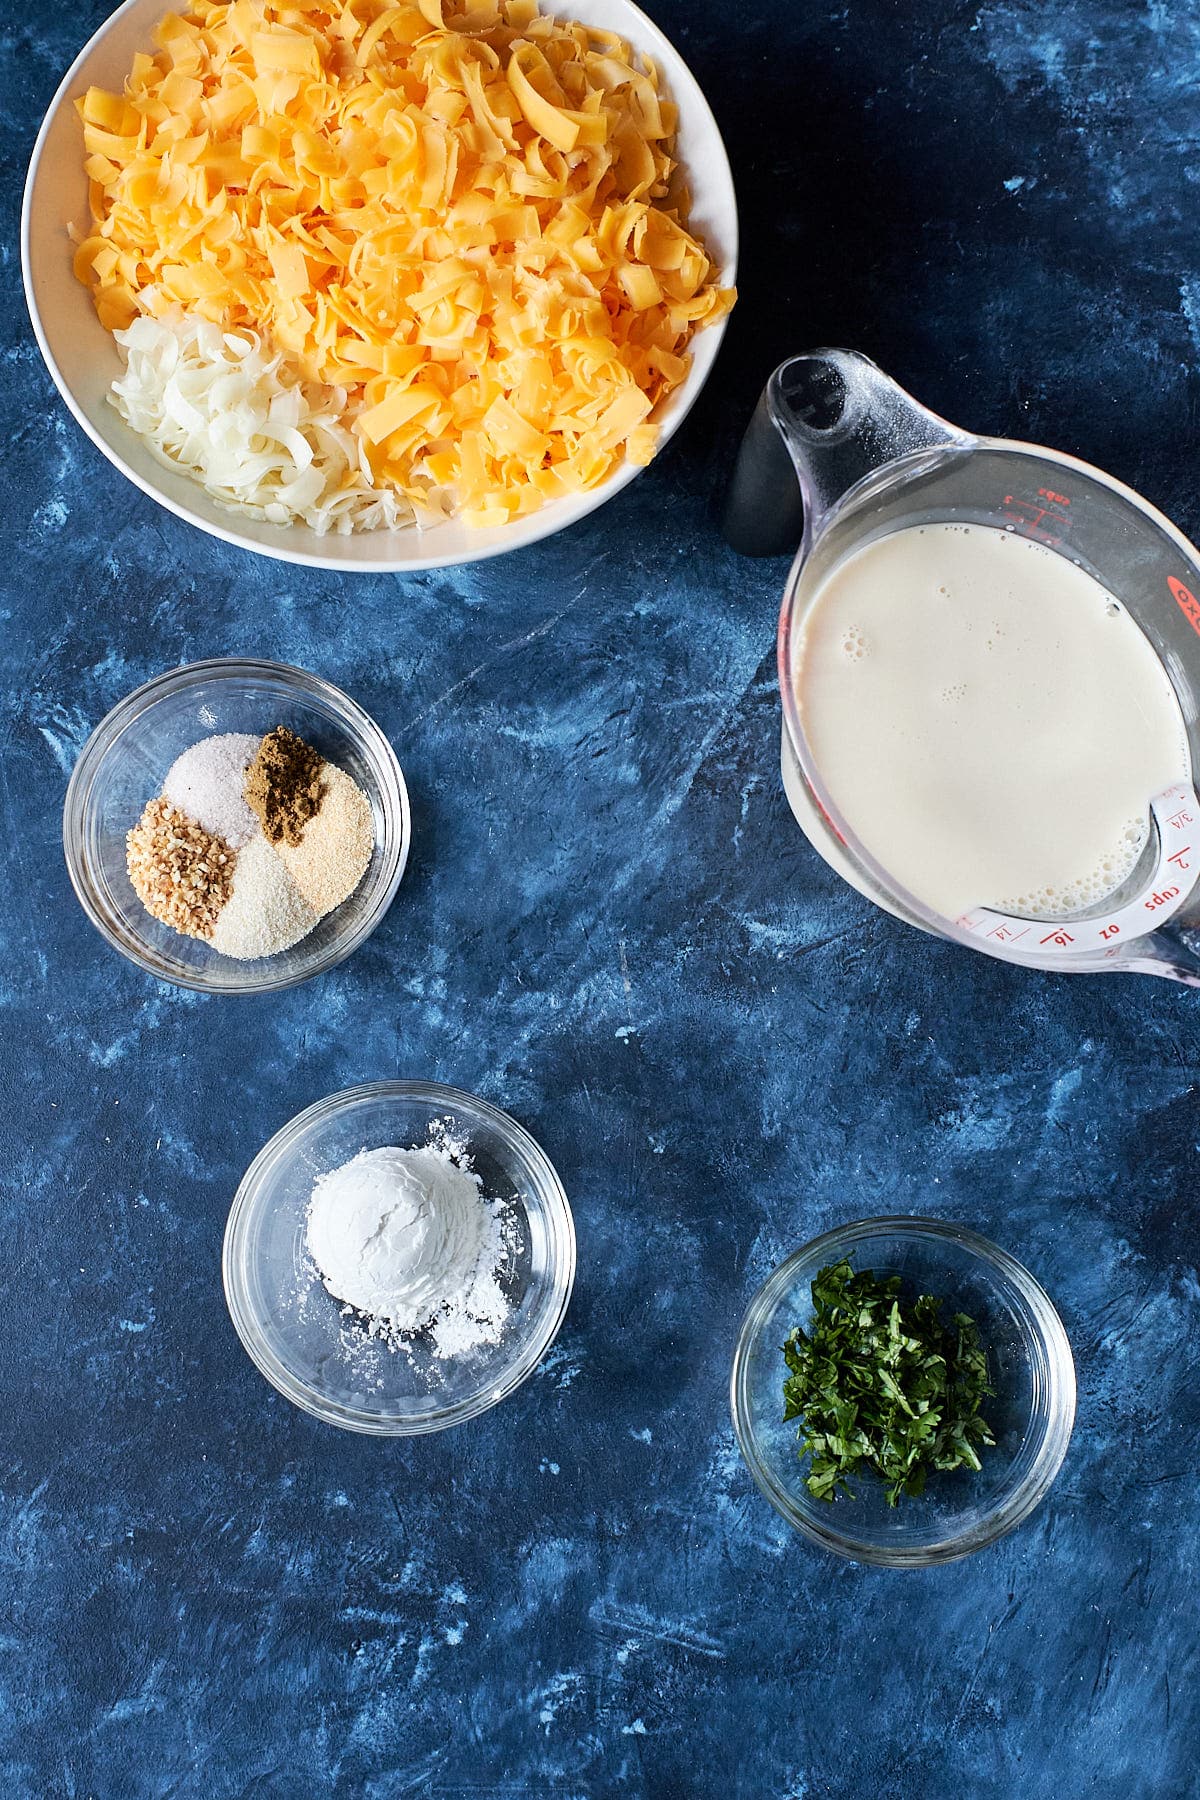 Queso ingredients - shredded cheese, evaporated milk, spices and cilantro